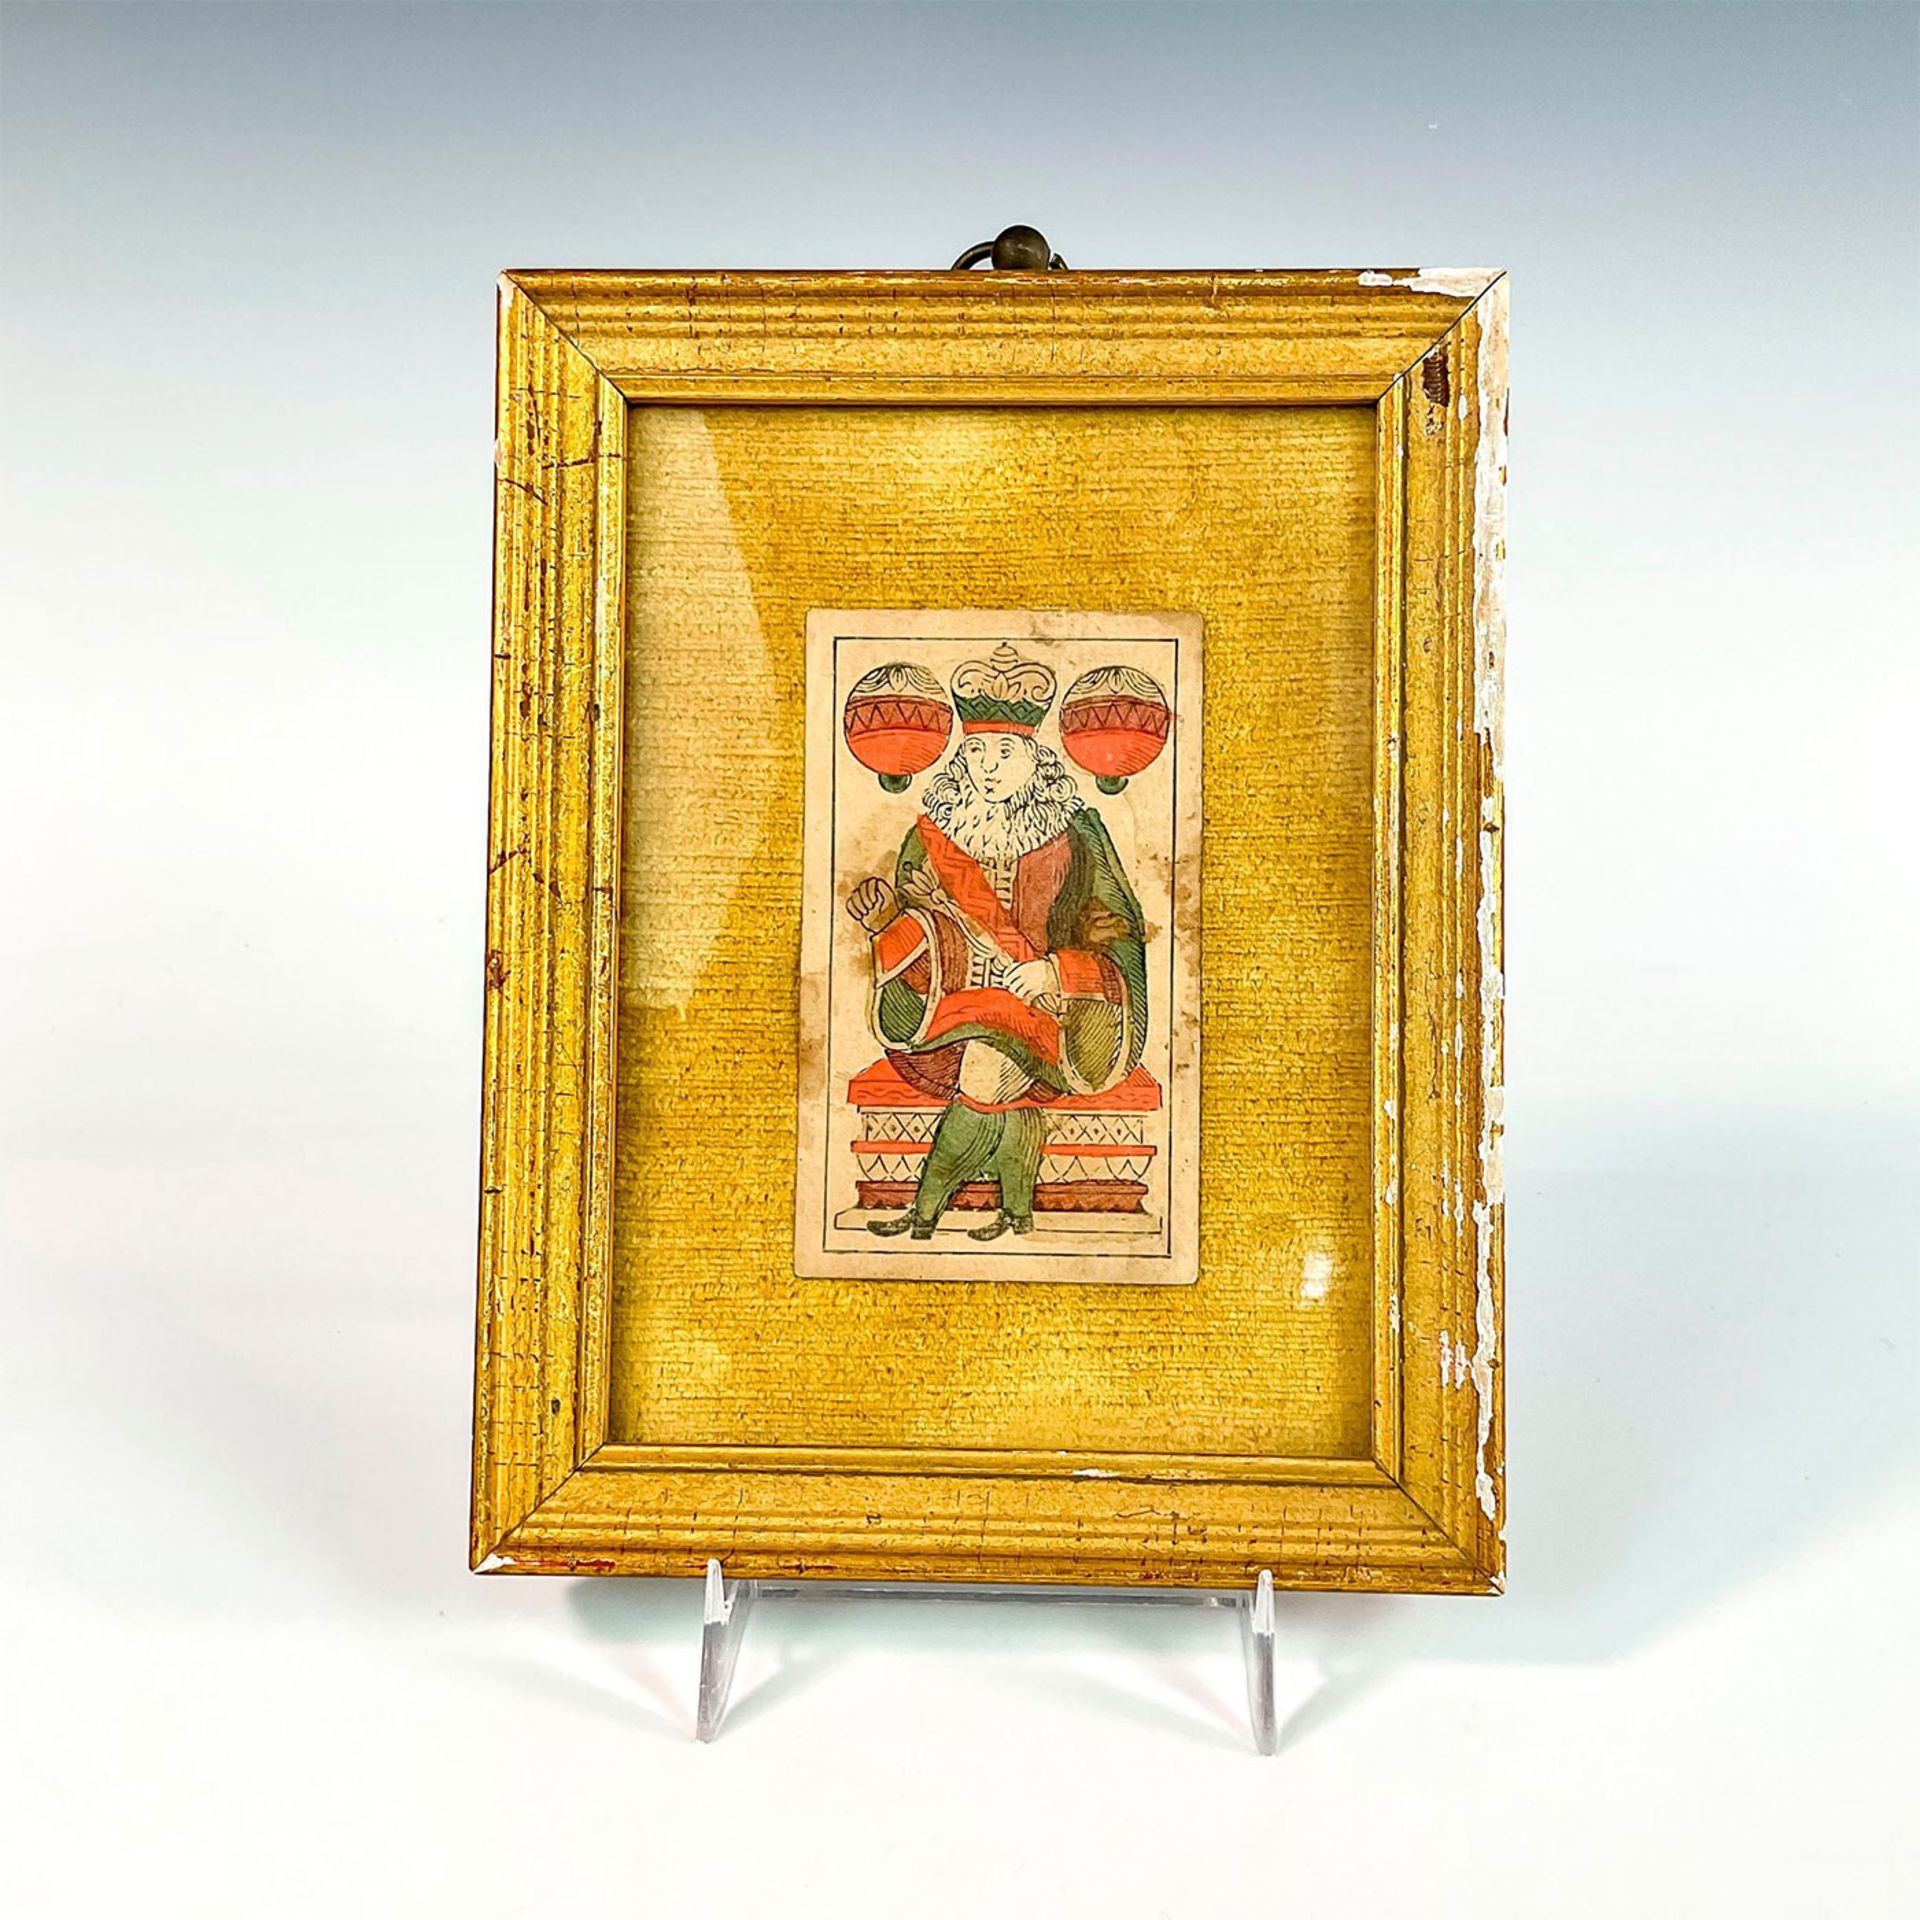 Antique Playing Card in a Frame